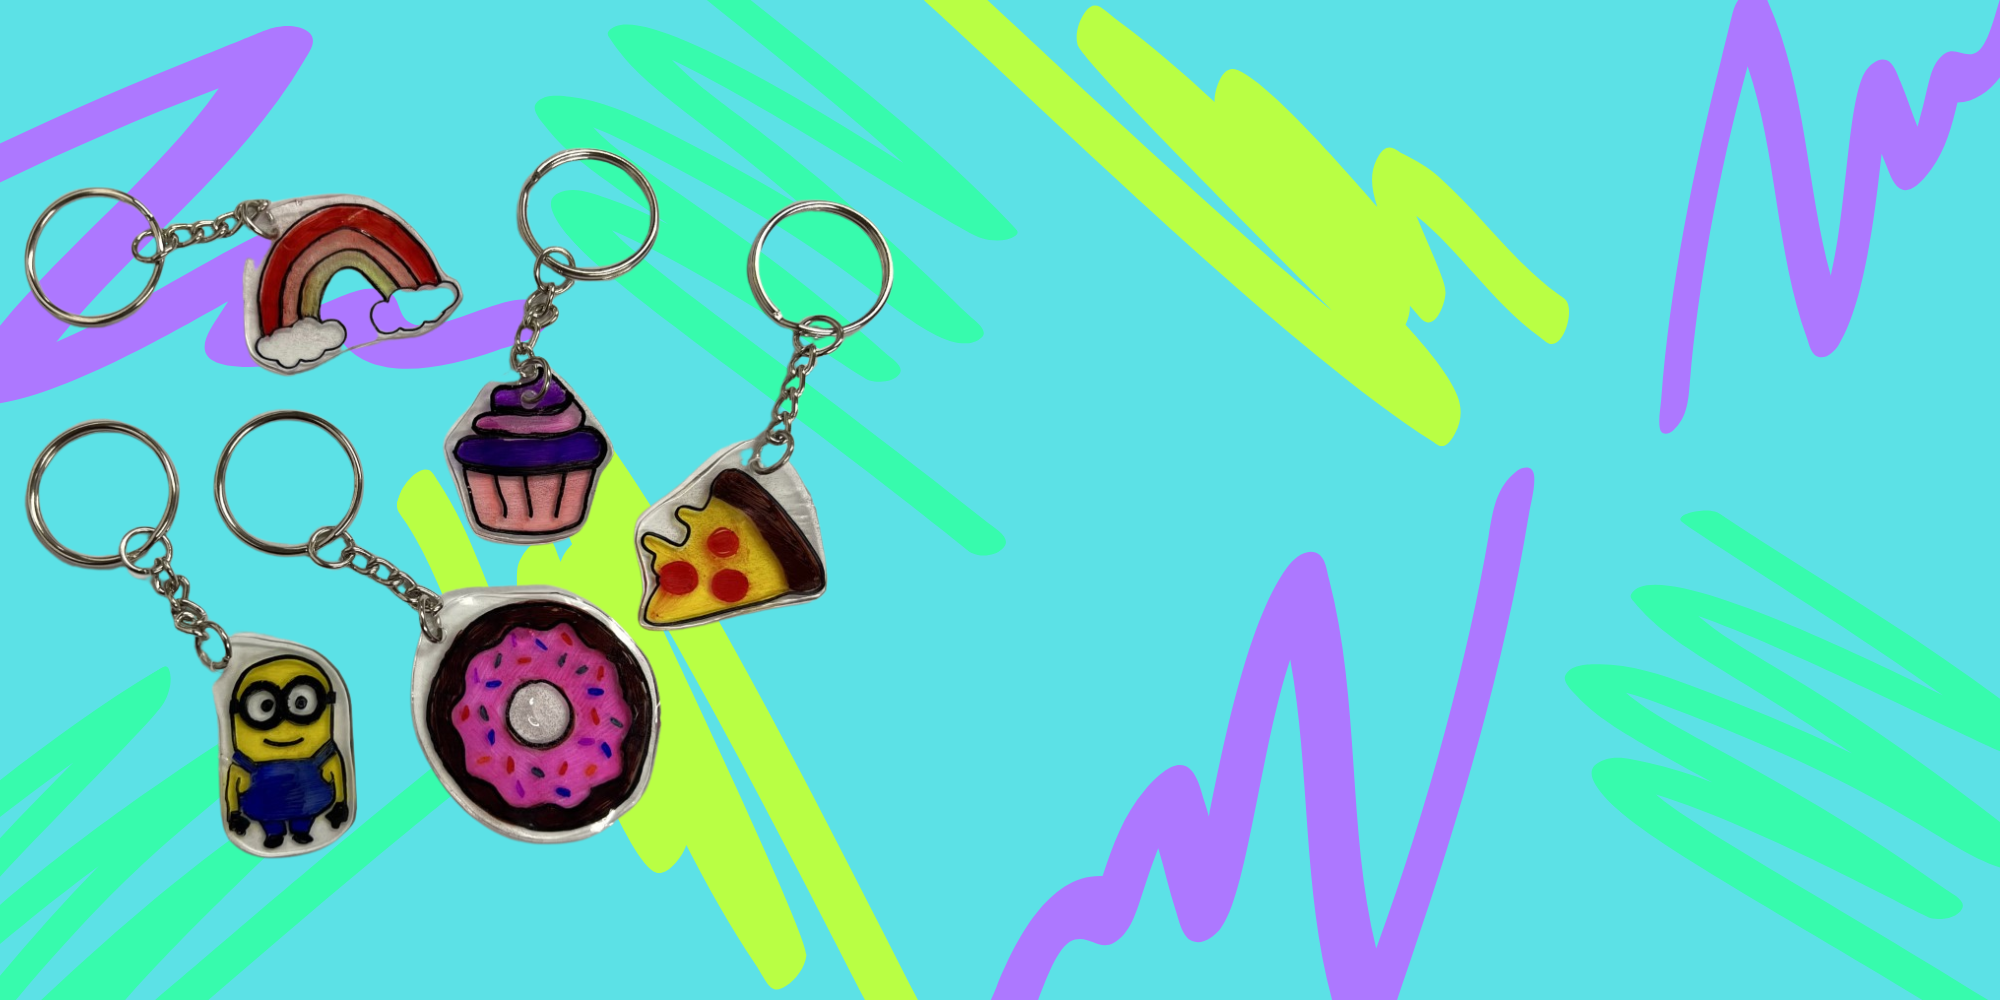 Crafternoon: Shrinky Dink Keychains